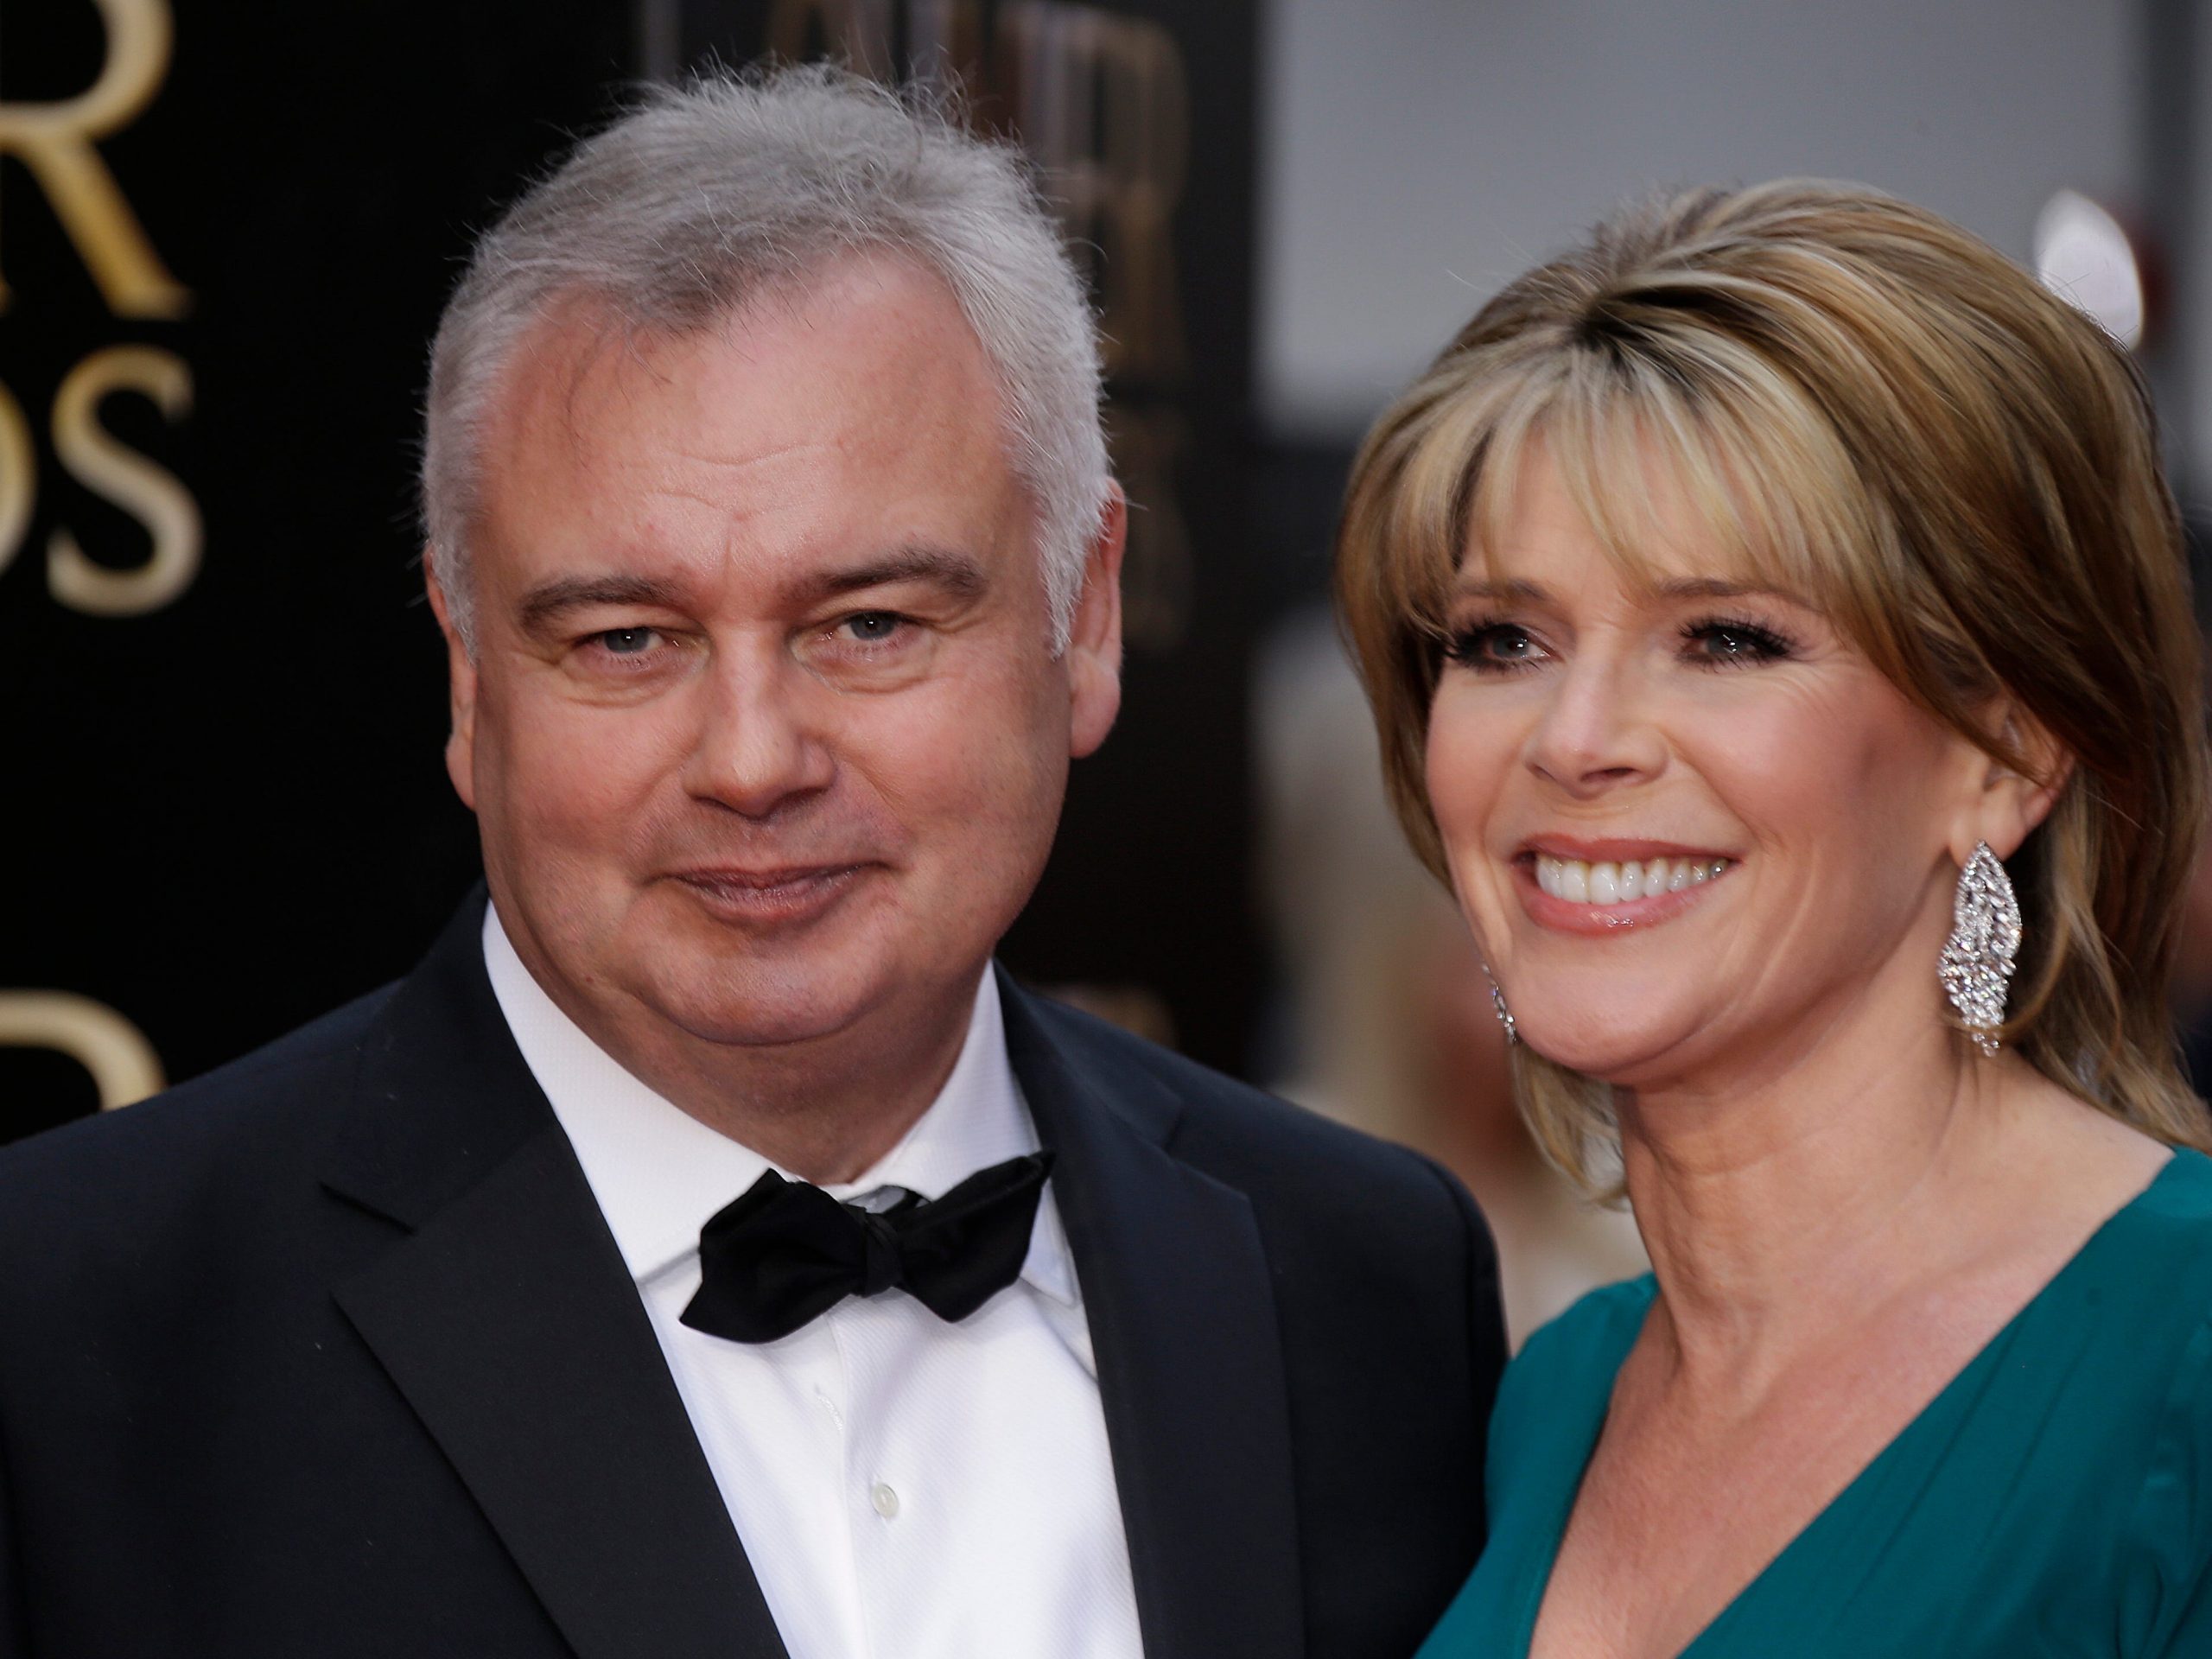 Eamonn Holmes and and wife Ruth Langsford pose for photographers upon arrival at the Olivier Awards at the Royal Opera House in central London, Sunday, April 12, 2015.